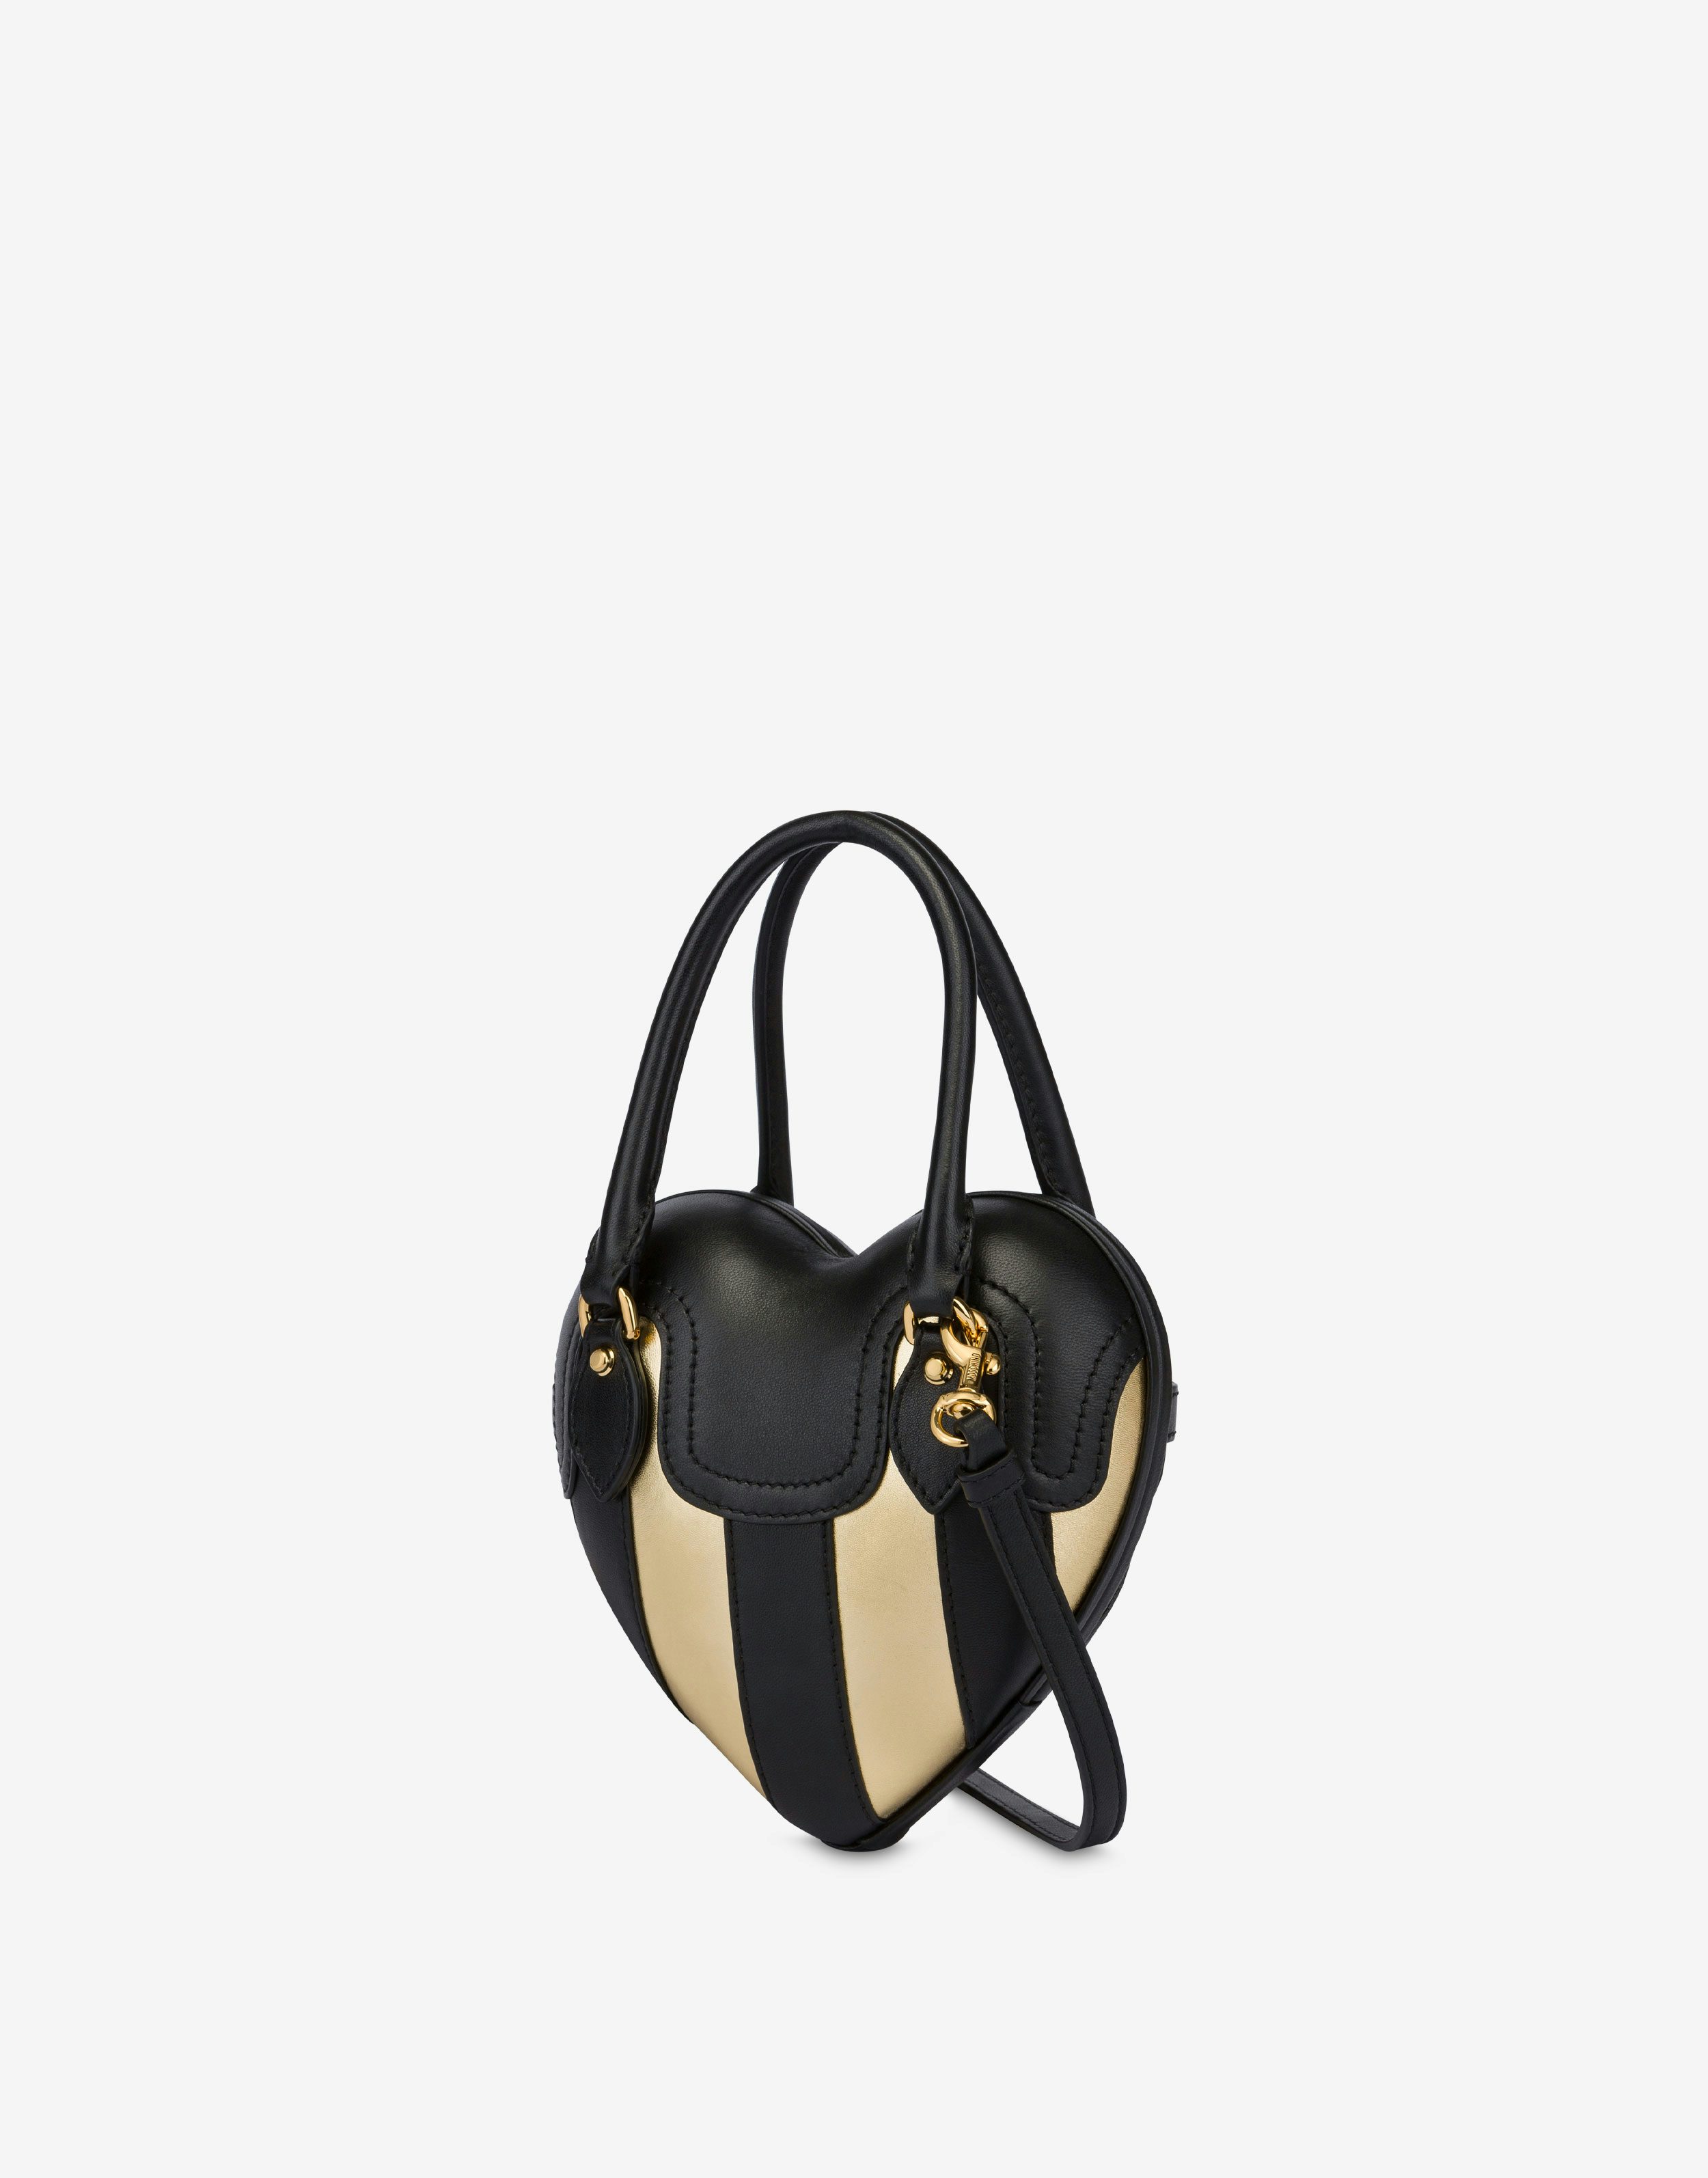 Moschino Heartbeat bag Stripes Patchwork 0